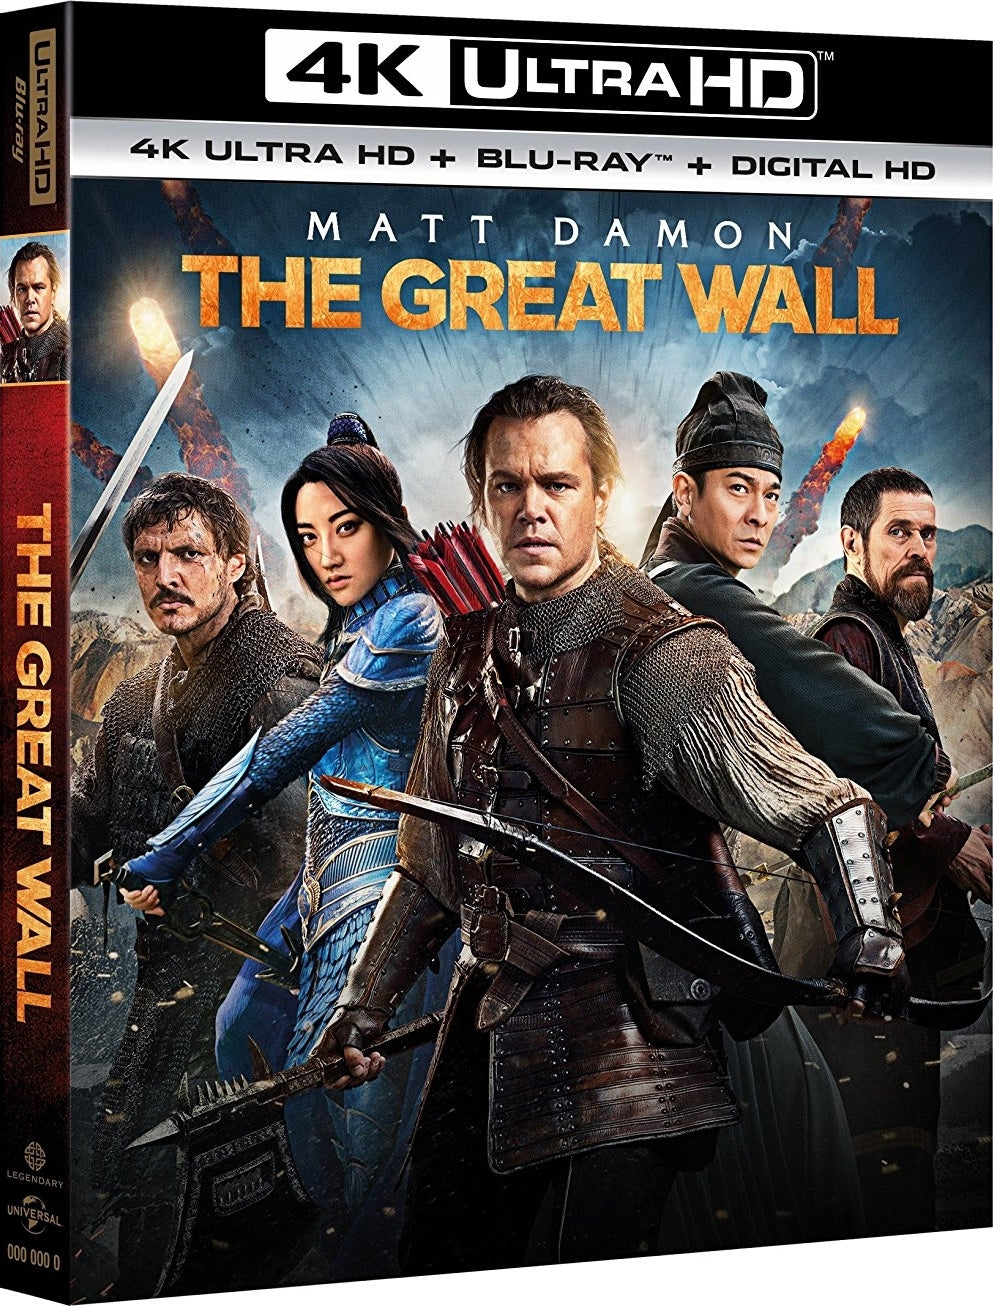 The Great Wall (Slip)